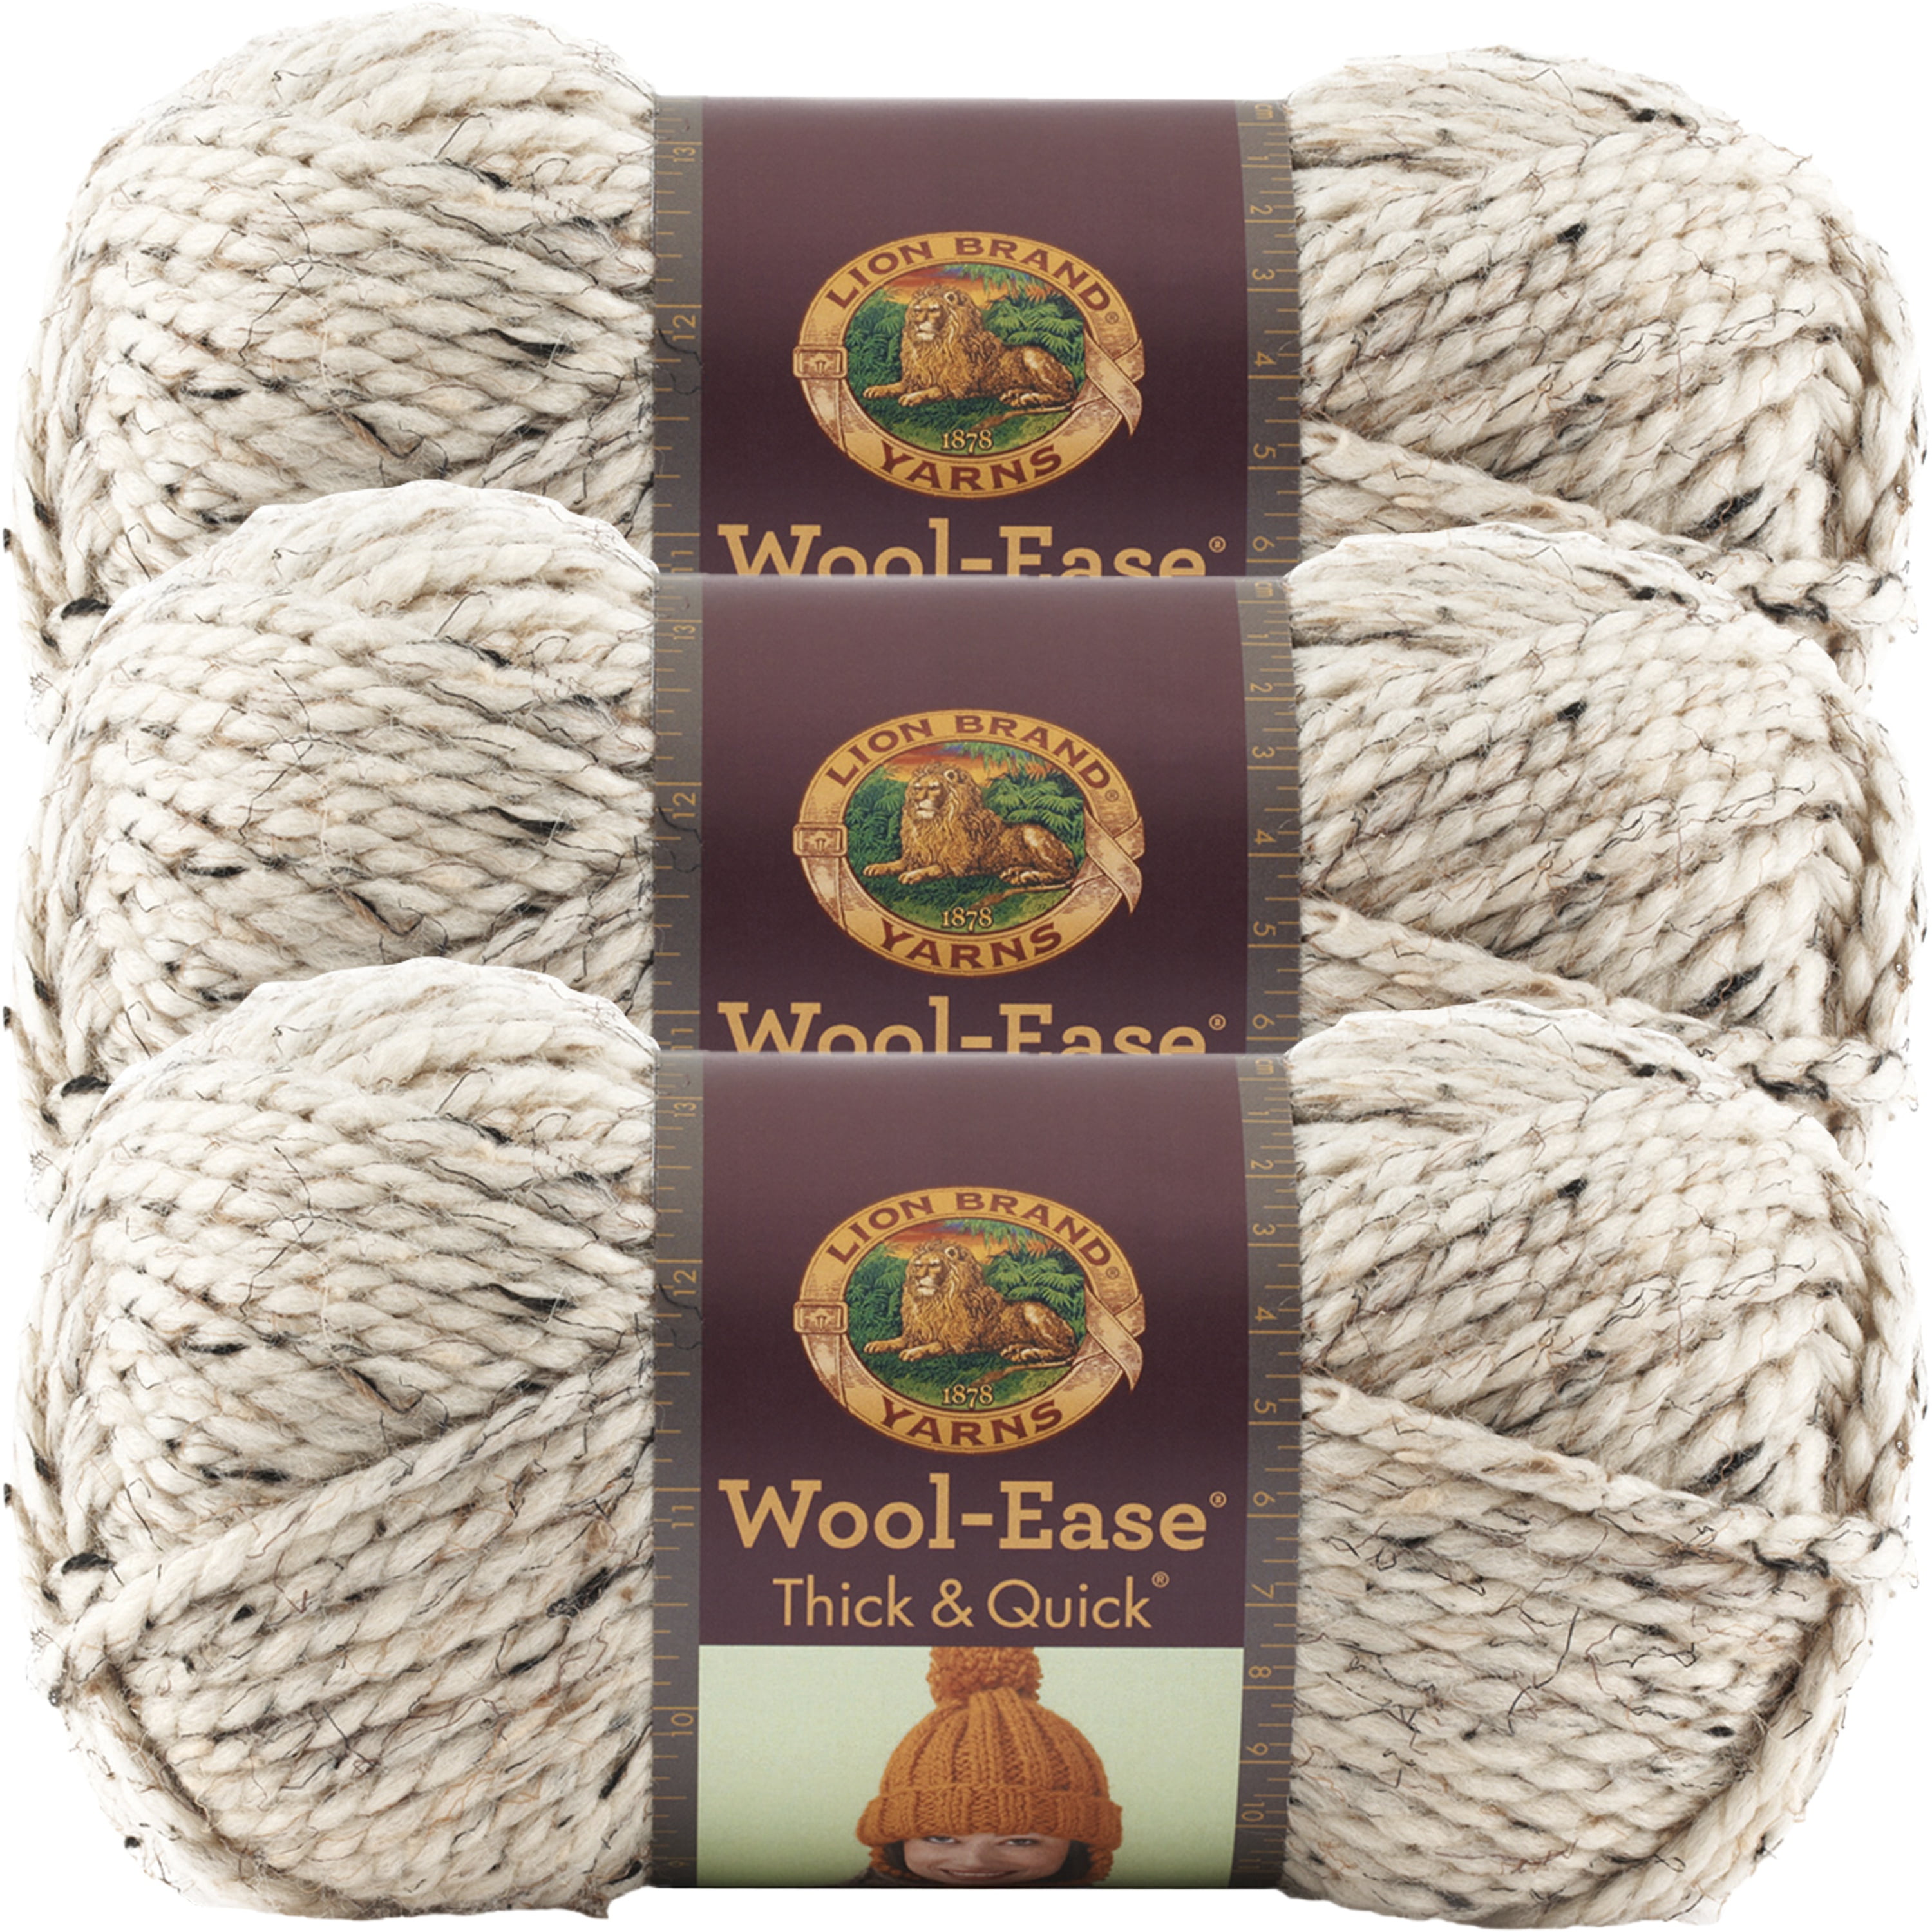 Lion Brand Wool-Ease Thick & Quick Yarn-Oatmeal, Multipack Of 3 